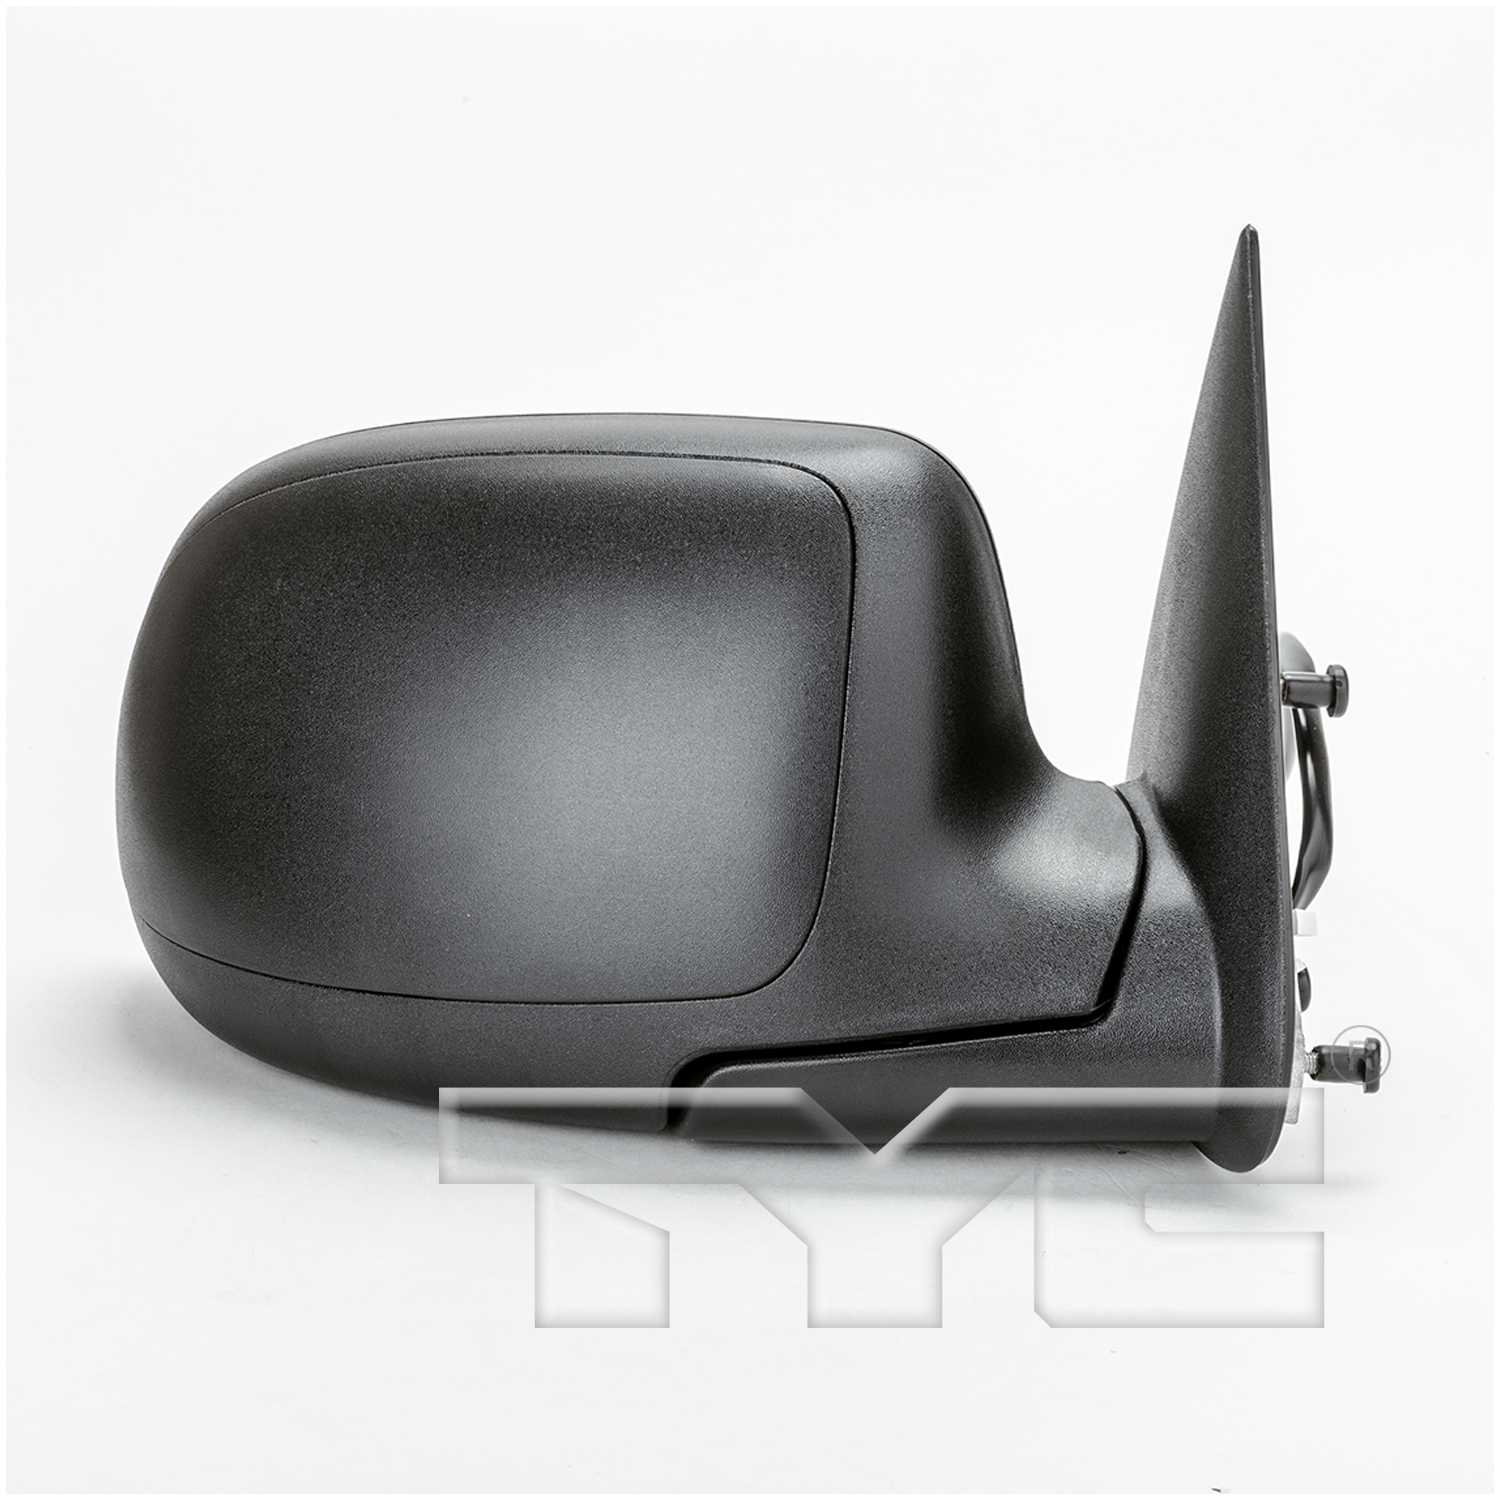 Aftermarket MIRRORS for CHEVROLET - AVALANCHE 1500, AVALANCHE 1500,03-06,RT Mirror outside rear view